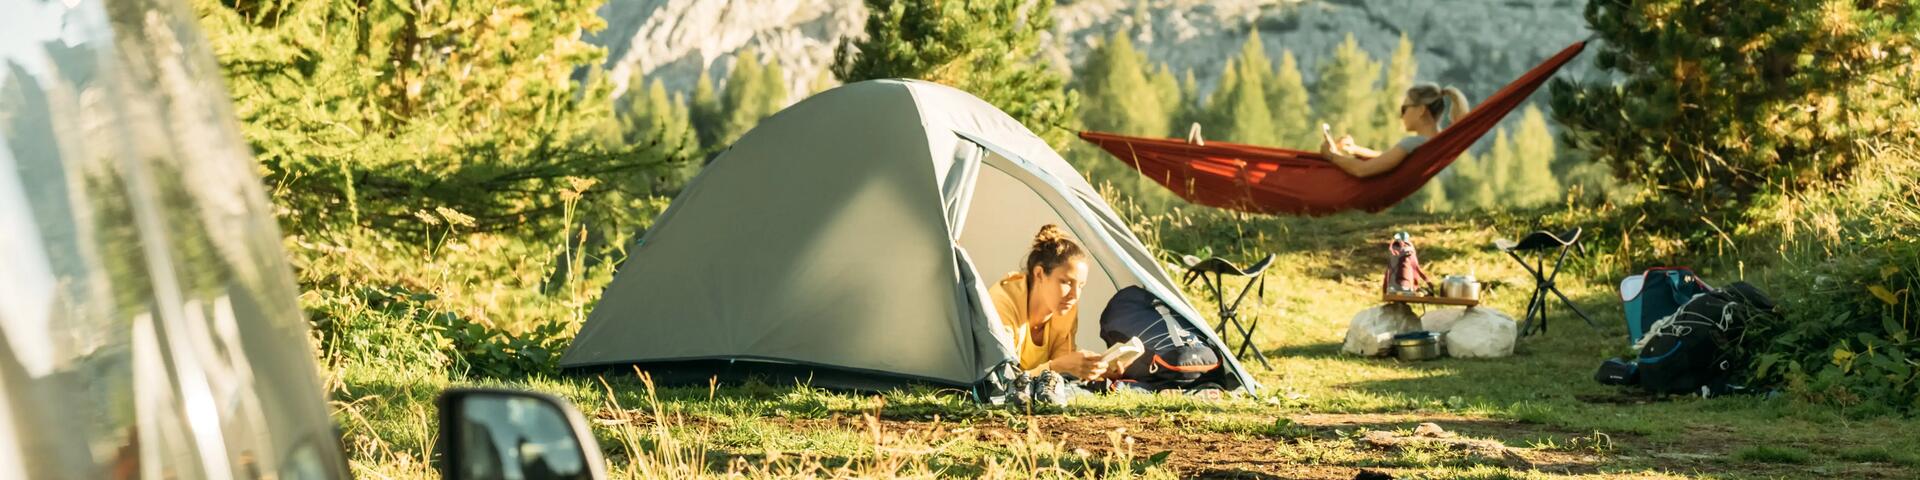 Camping Shop  Camping Equipment & Tents from Decathlon